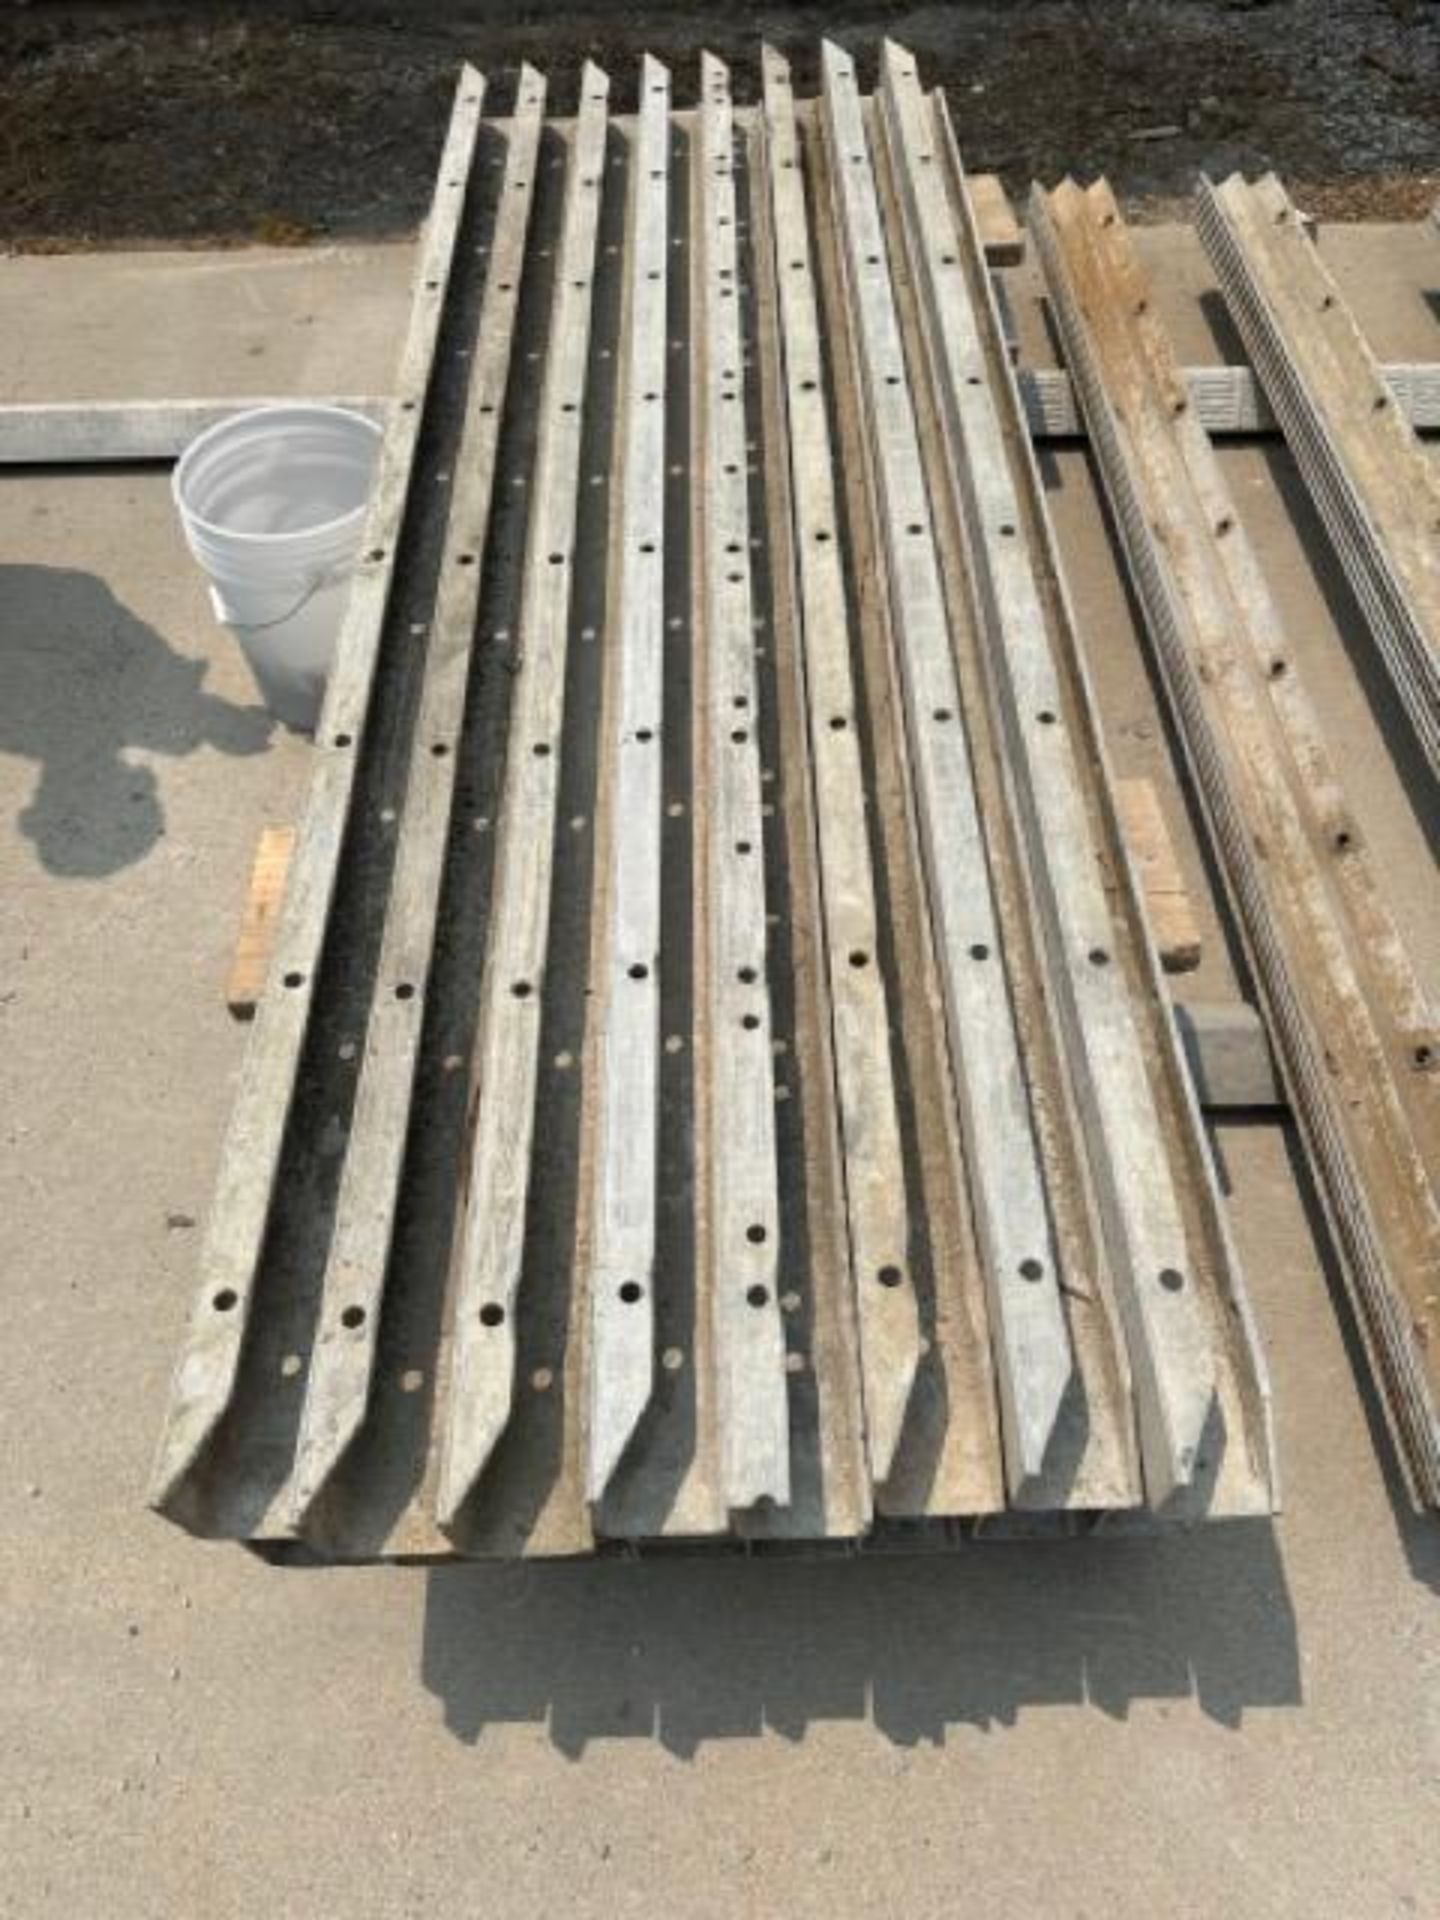 (22) 4" x 4" x 8' ISC Wall-Ties aluminum concrete forms, smooth, 6-12 hole pattern - Image 3 of 3